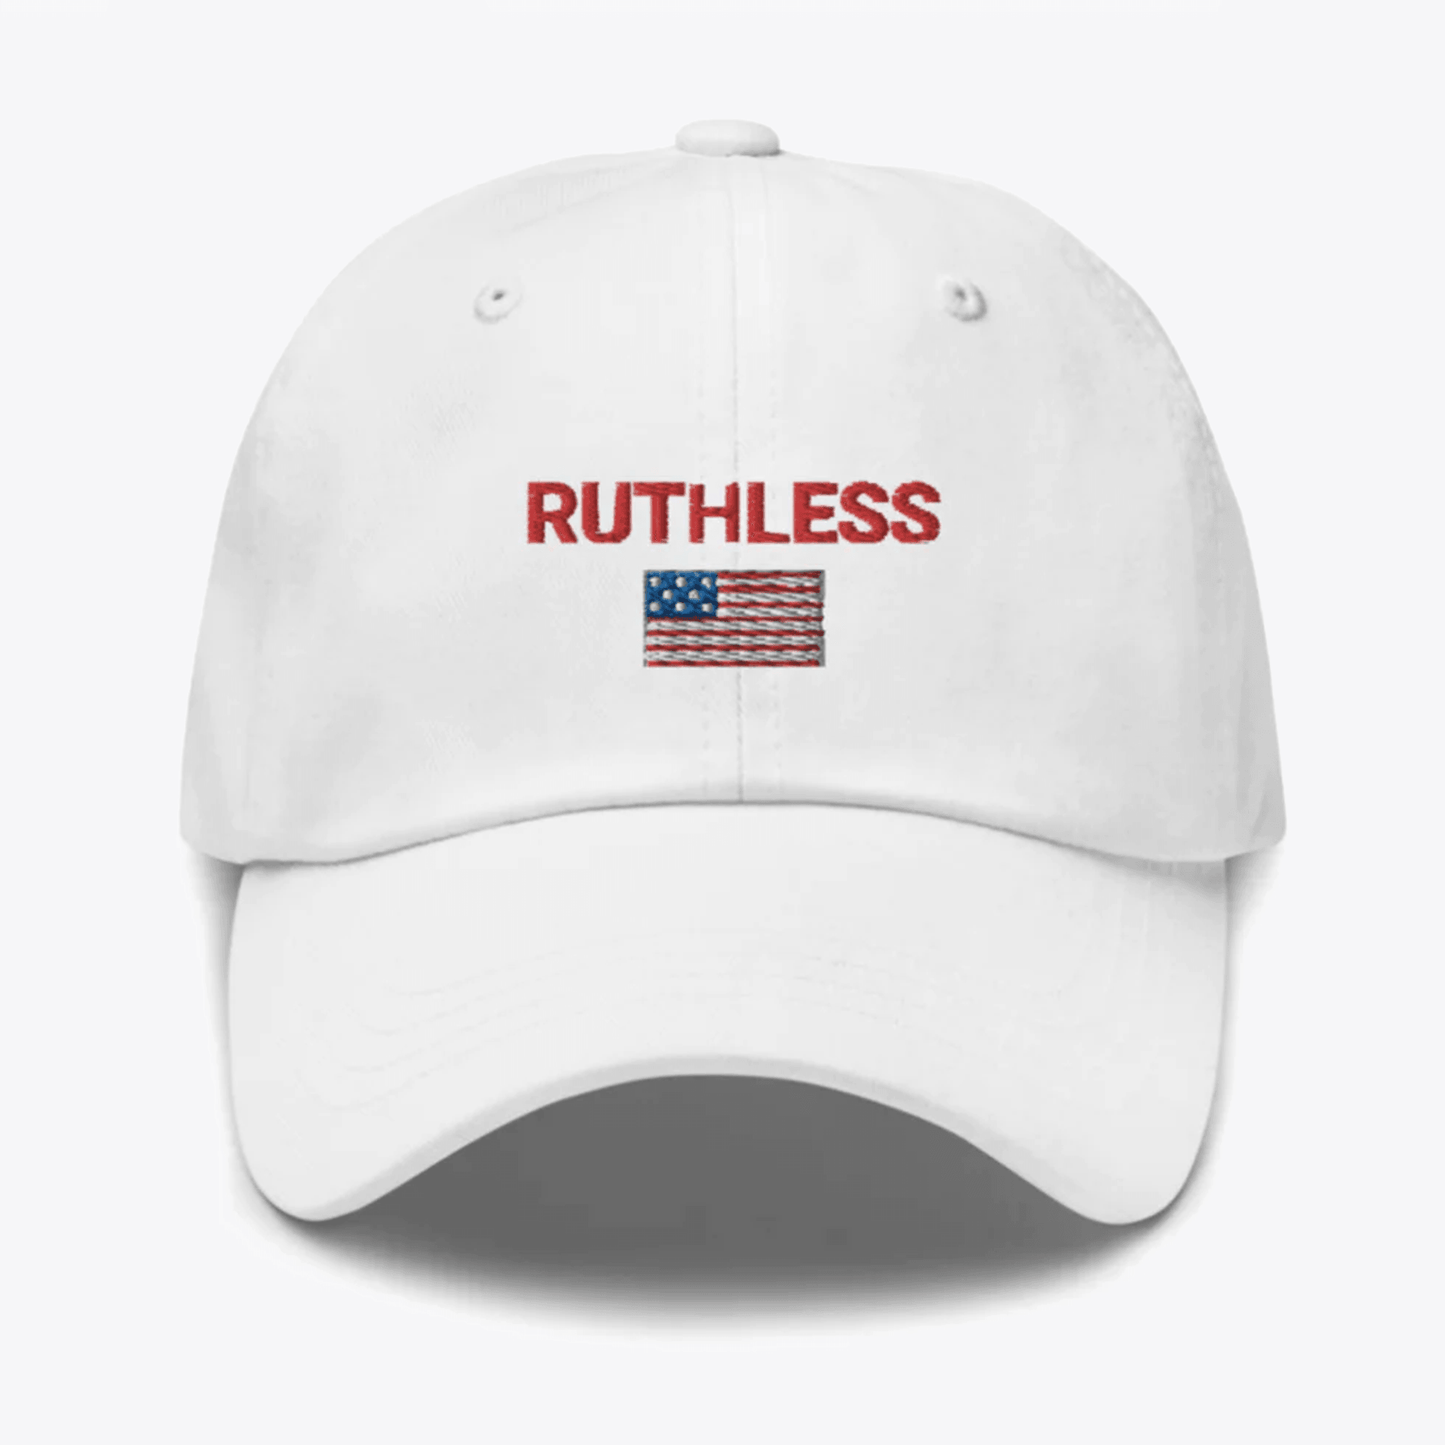 LIMITED EDITION: Ruthless American flag hat - Ruthless